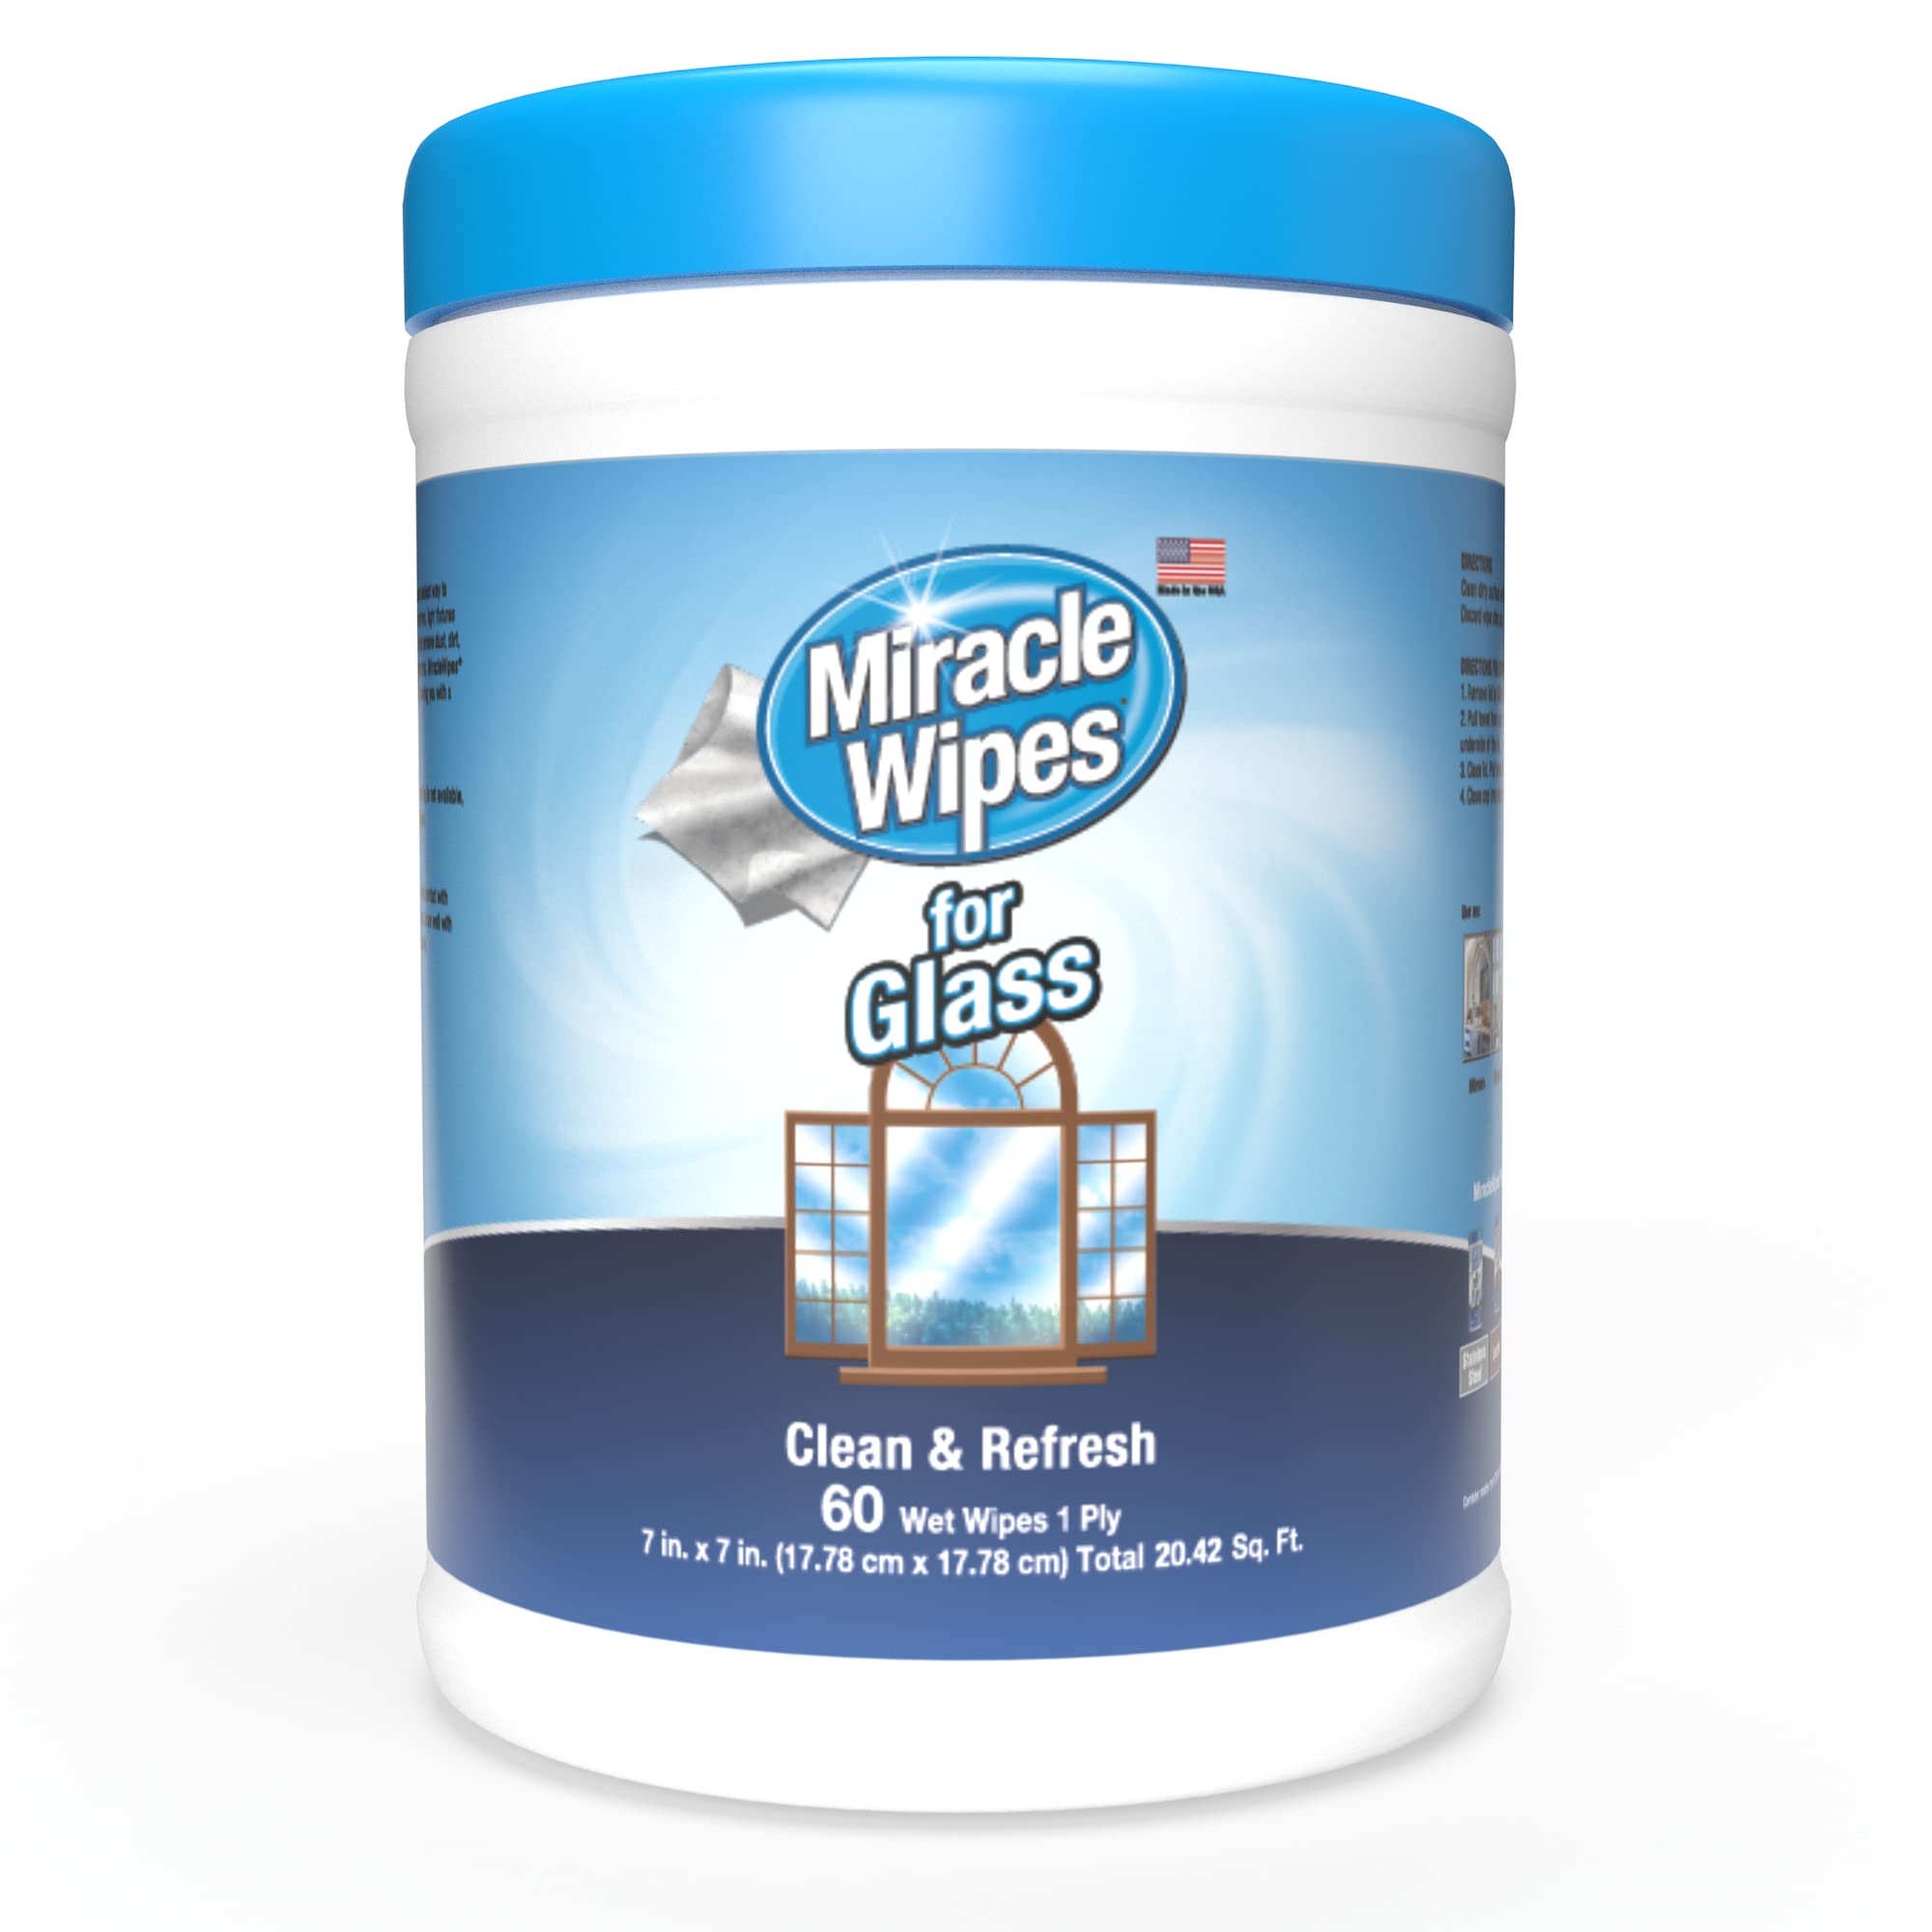 MiracleWipes for Glass, Disposable and Streak Free Cleaning Wipes